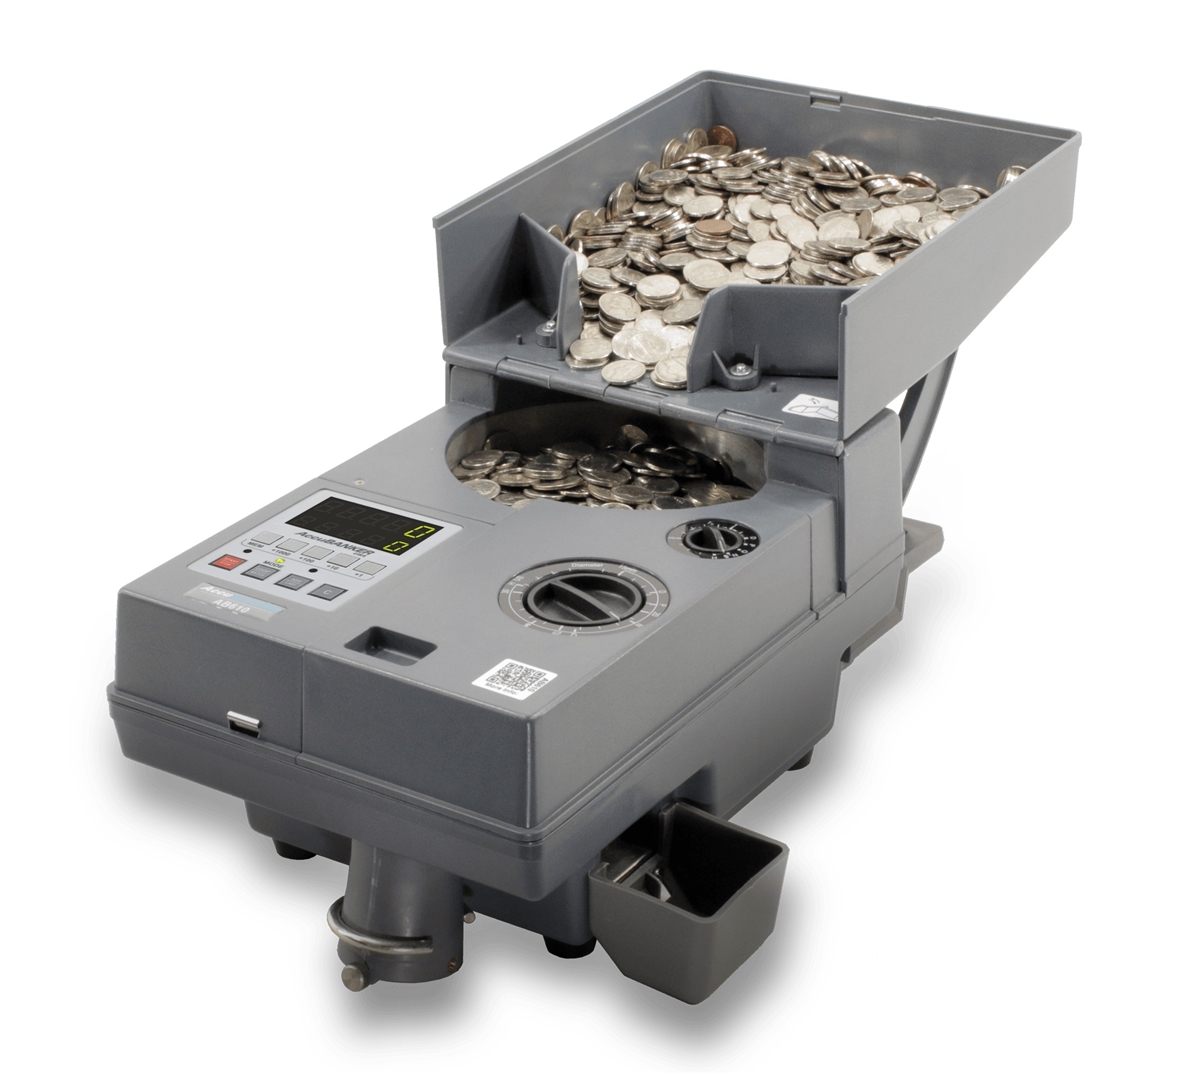  Ribao HCS-3300 High Speed Coin Counter, Heavy Duty Bank Grade Coin  Sorter with Large Hopper, Two-Year Warranty : Office Products